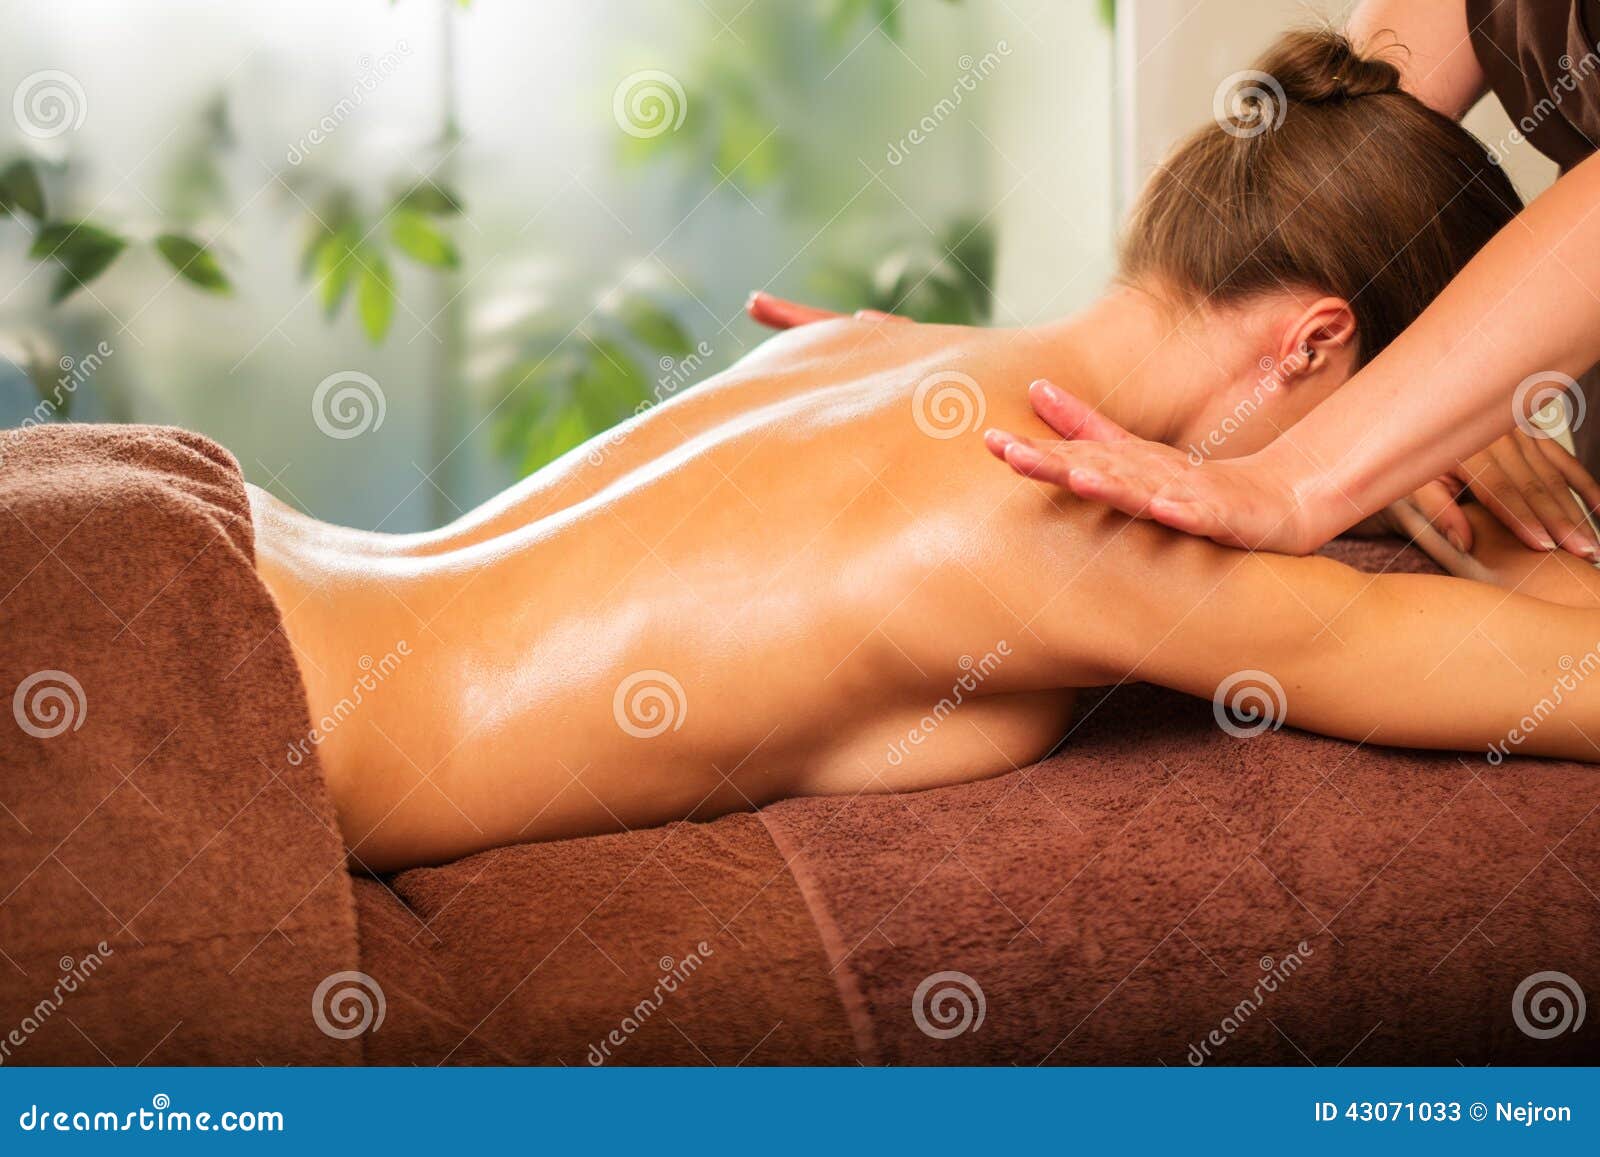 Woman Having Massage in a Spa Stock Image